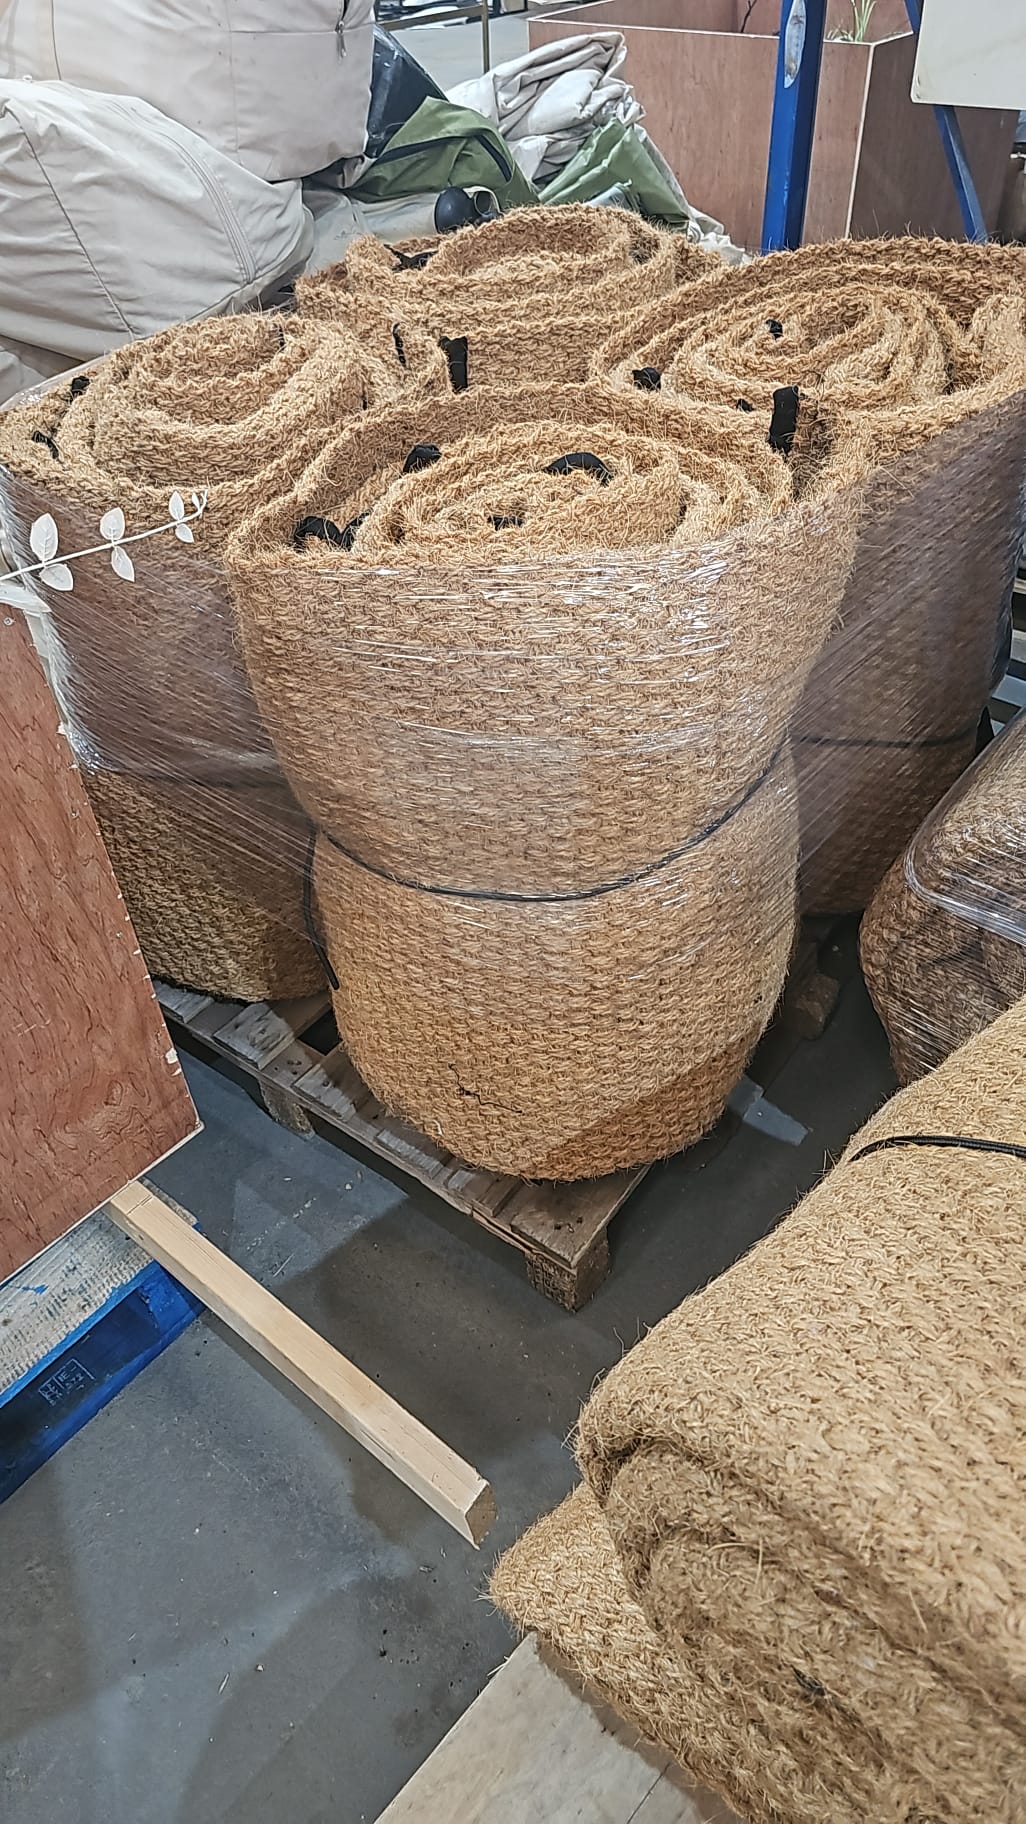 Used 4m-7m Coir Matting - Grade B (Reversible but Stains May Show Through)